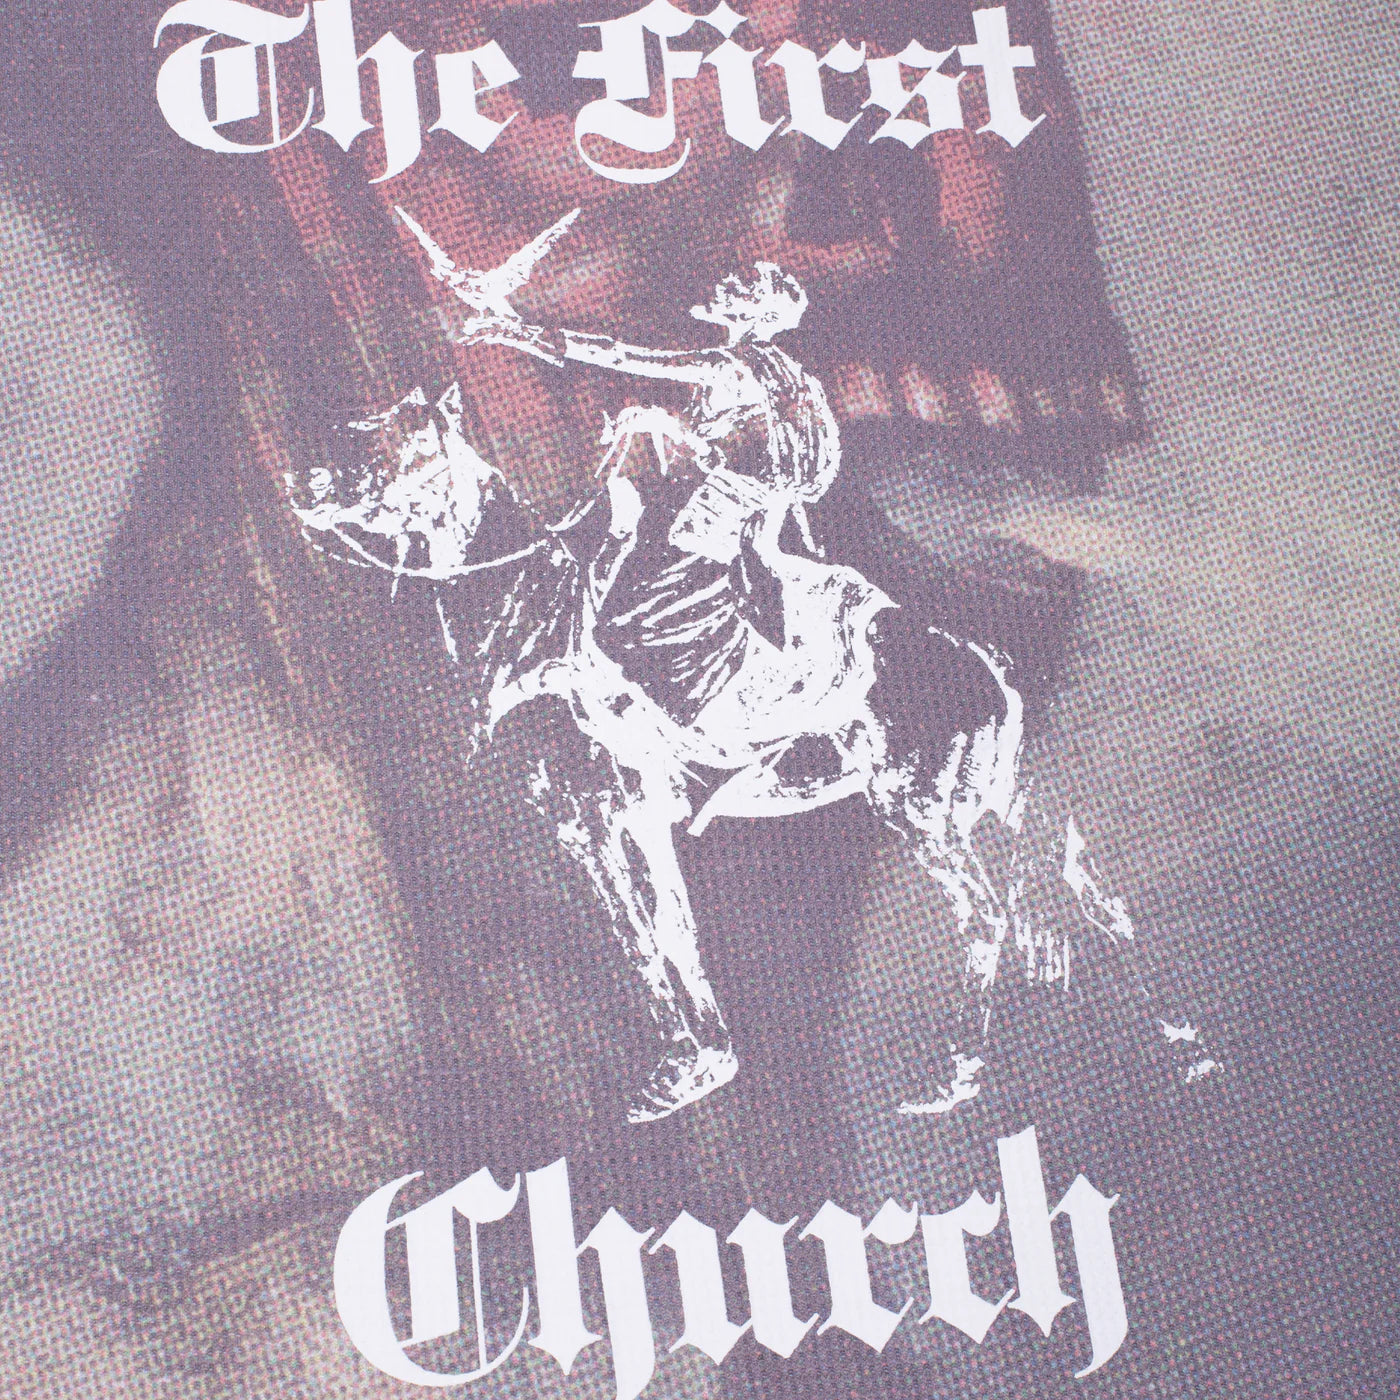 Fucking Awesome The First Church Thermal Shirt A.O.P